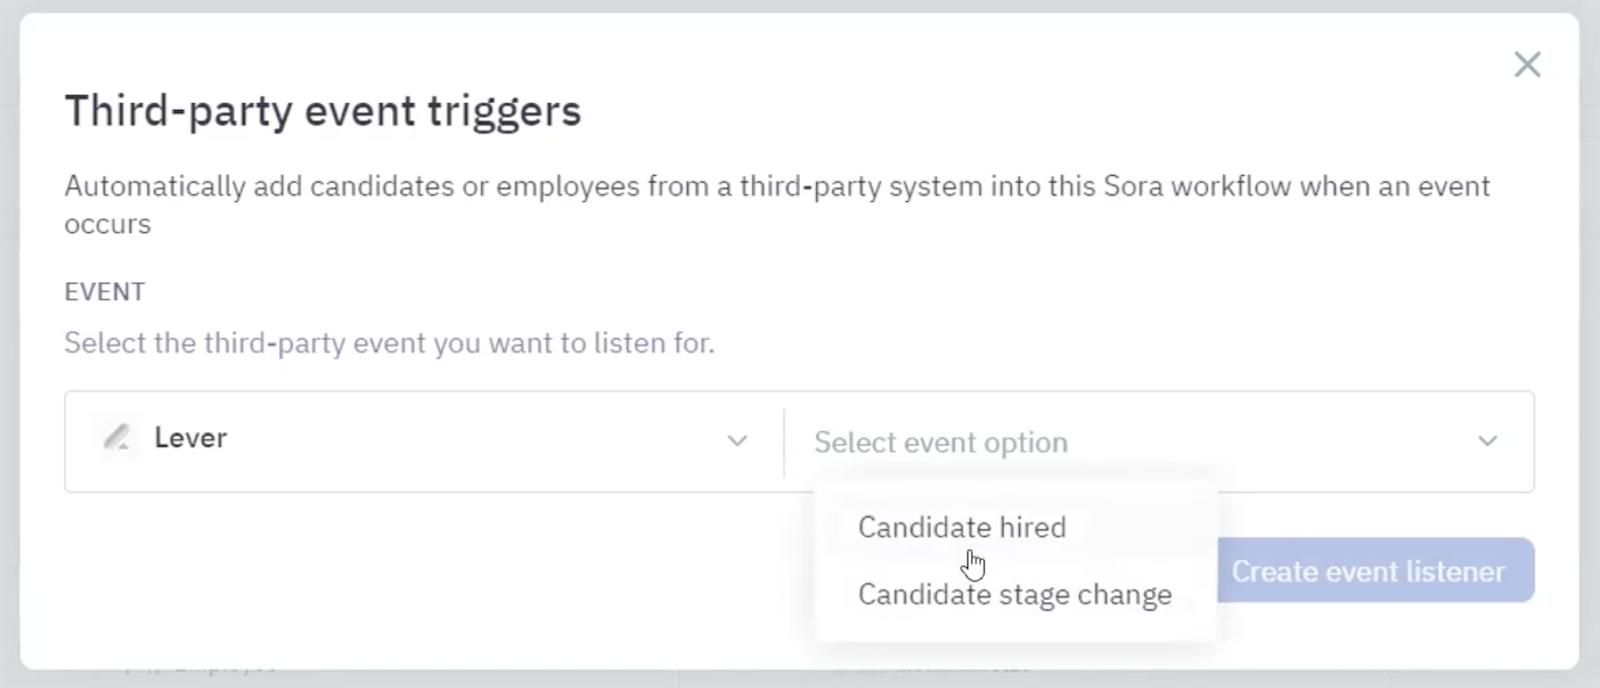 Third party even triggers modal in Sora; candidate hired option is highlighted on hover in event menu